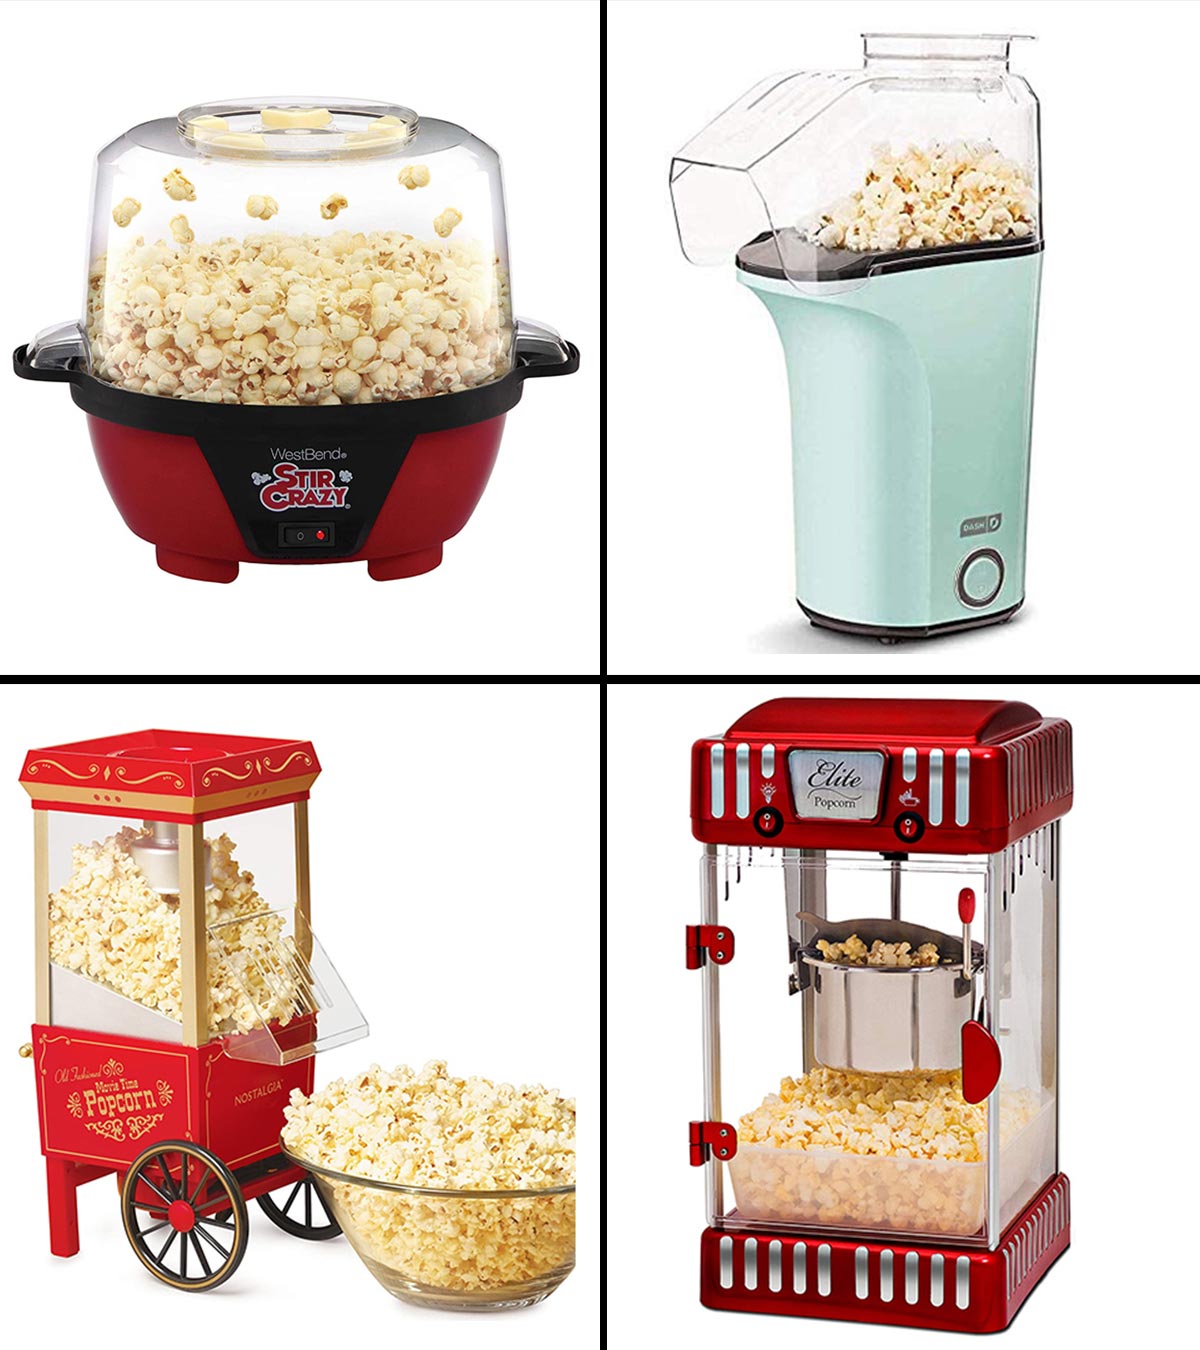 Excelvan Air Popcorn Maker for Healthy and Fat-Free Retro Hot Air Popcorn Red 